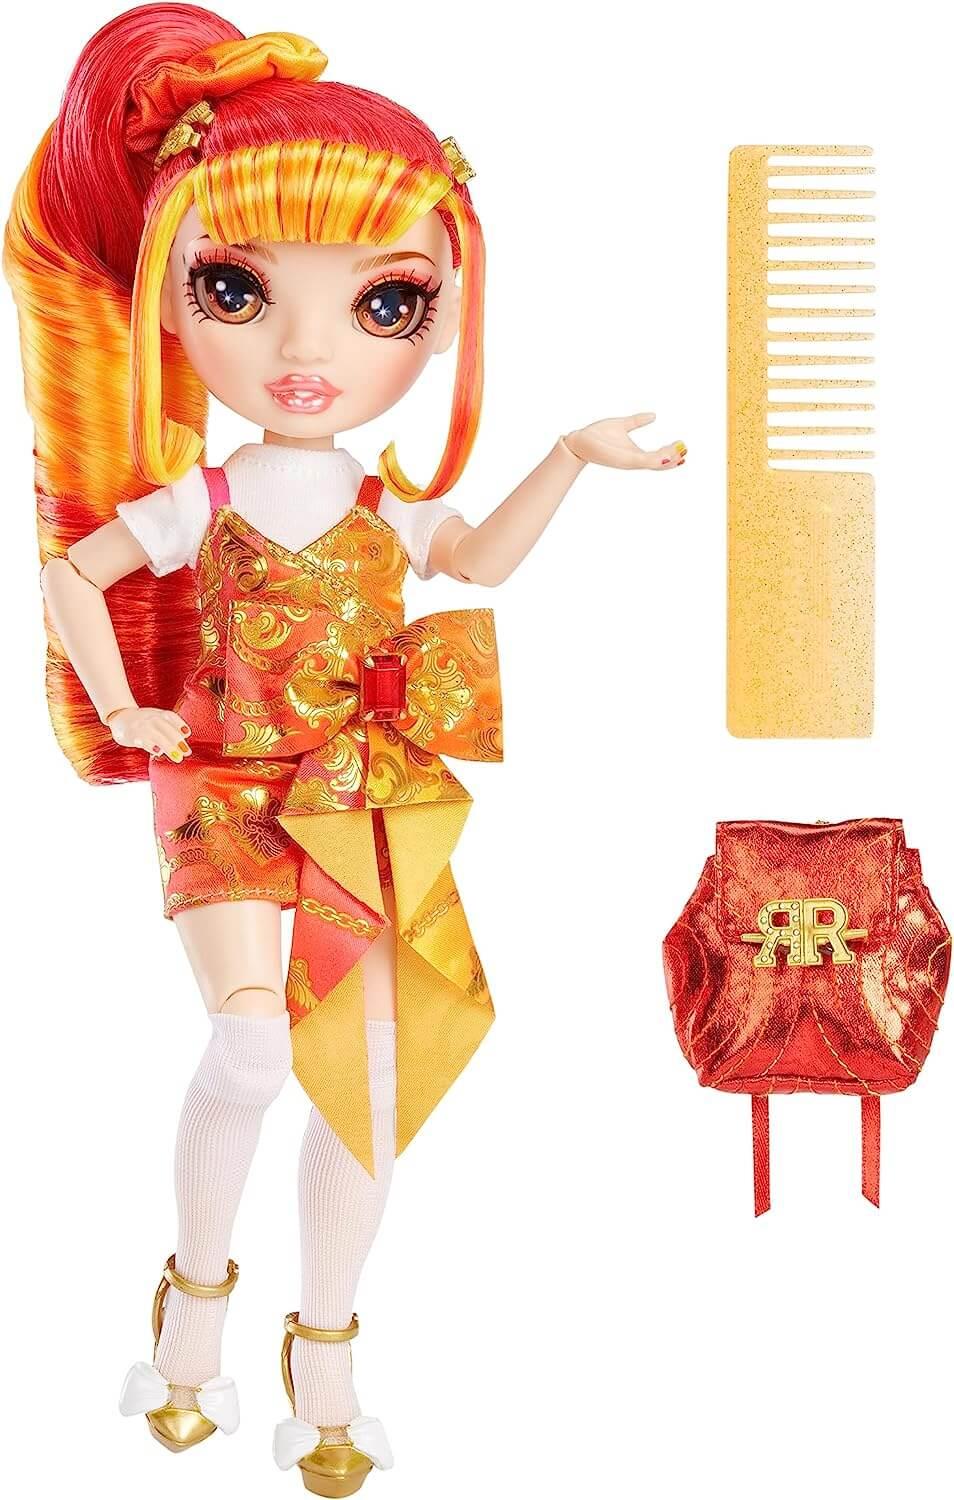 Rainbow High Jr High Special Edition Laurel De’Vious - 9" Red and Orange Posable Fashion Doll